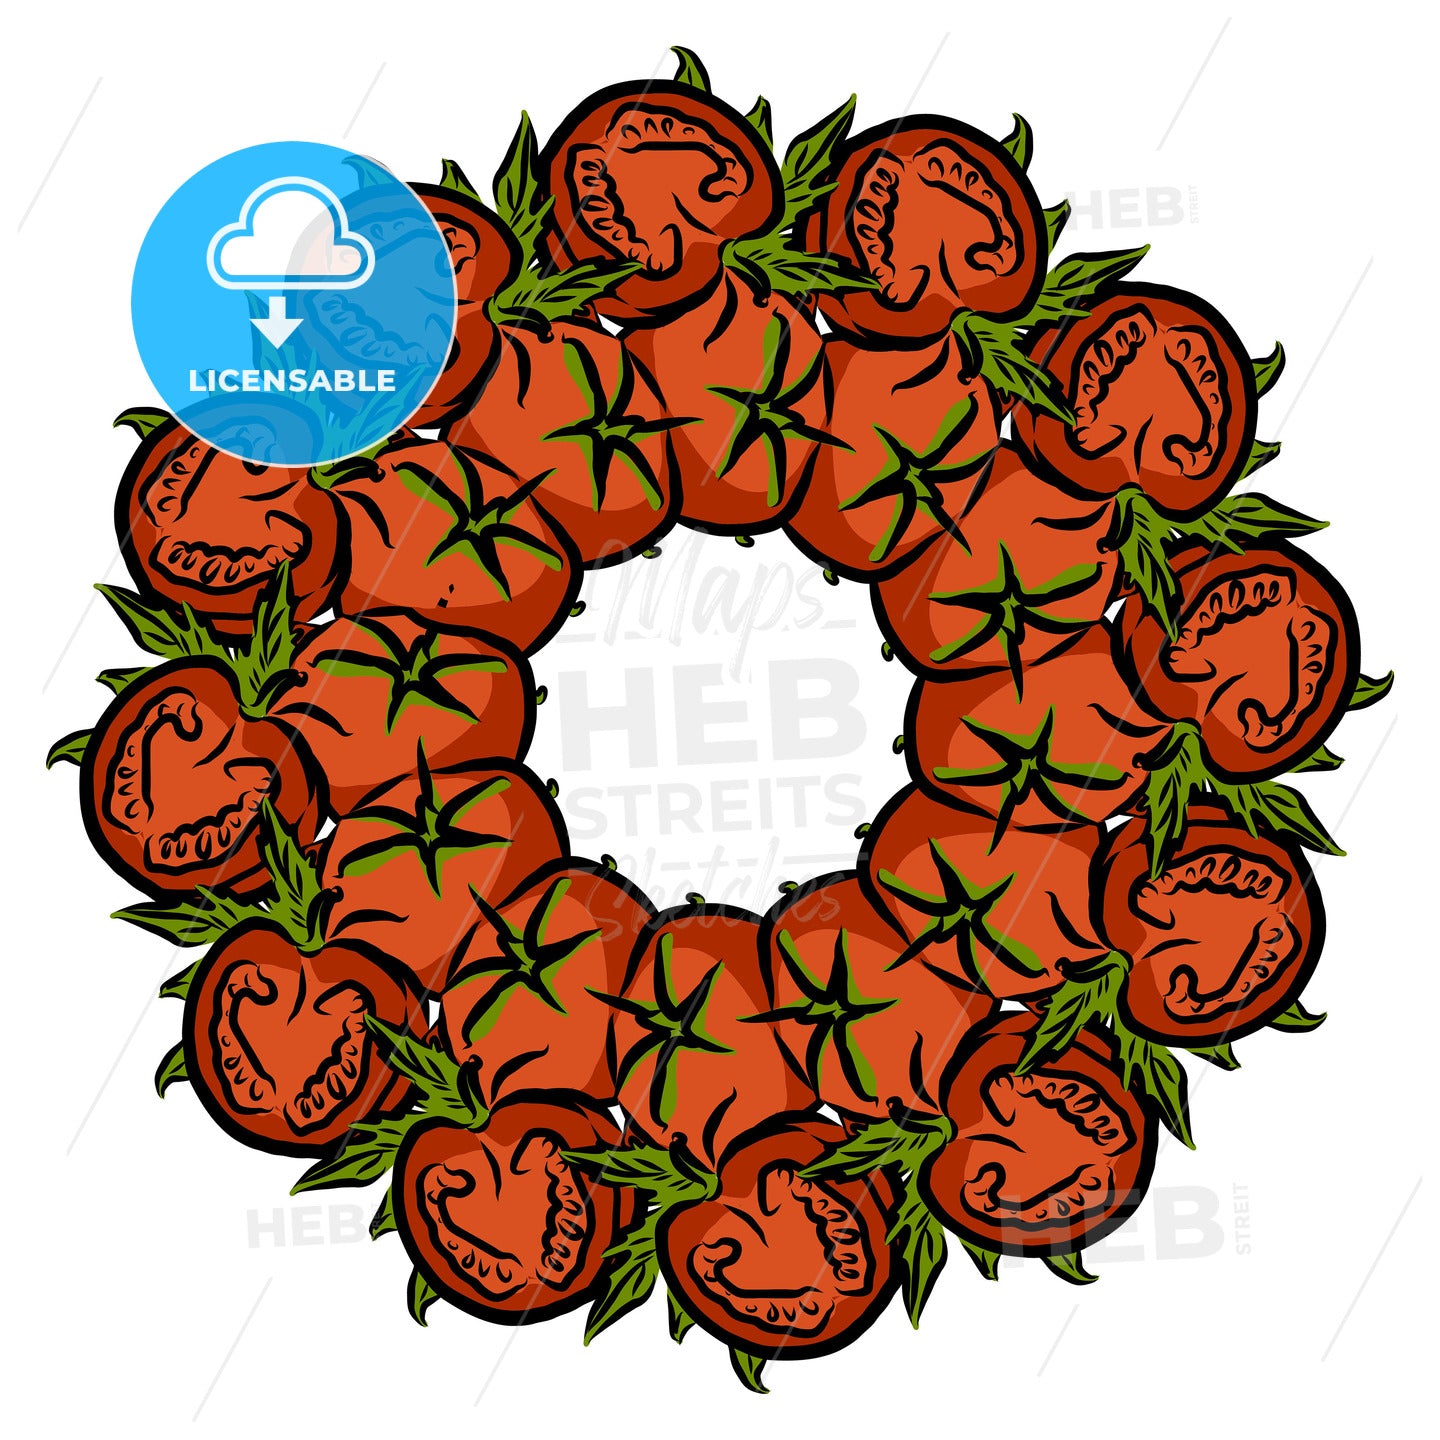 Many Tomatoes arranged in a circle on white – instant download